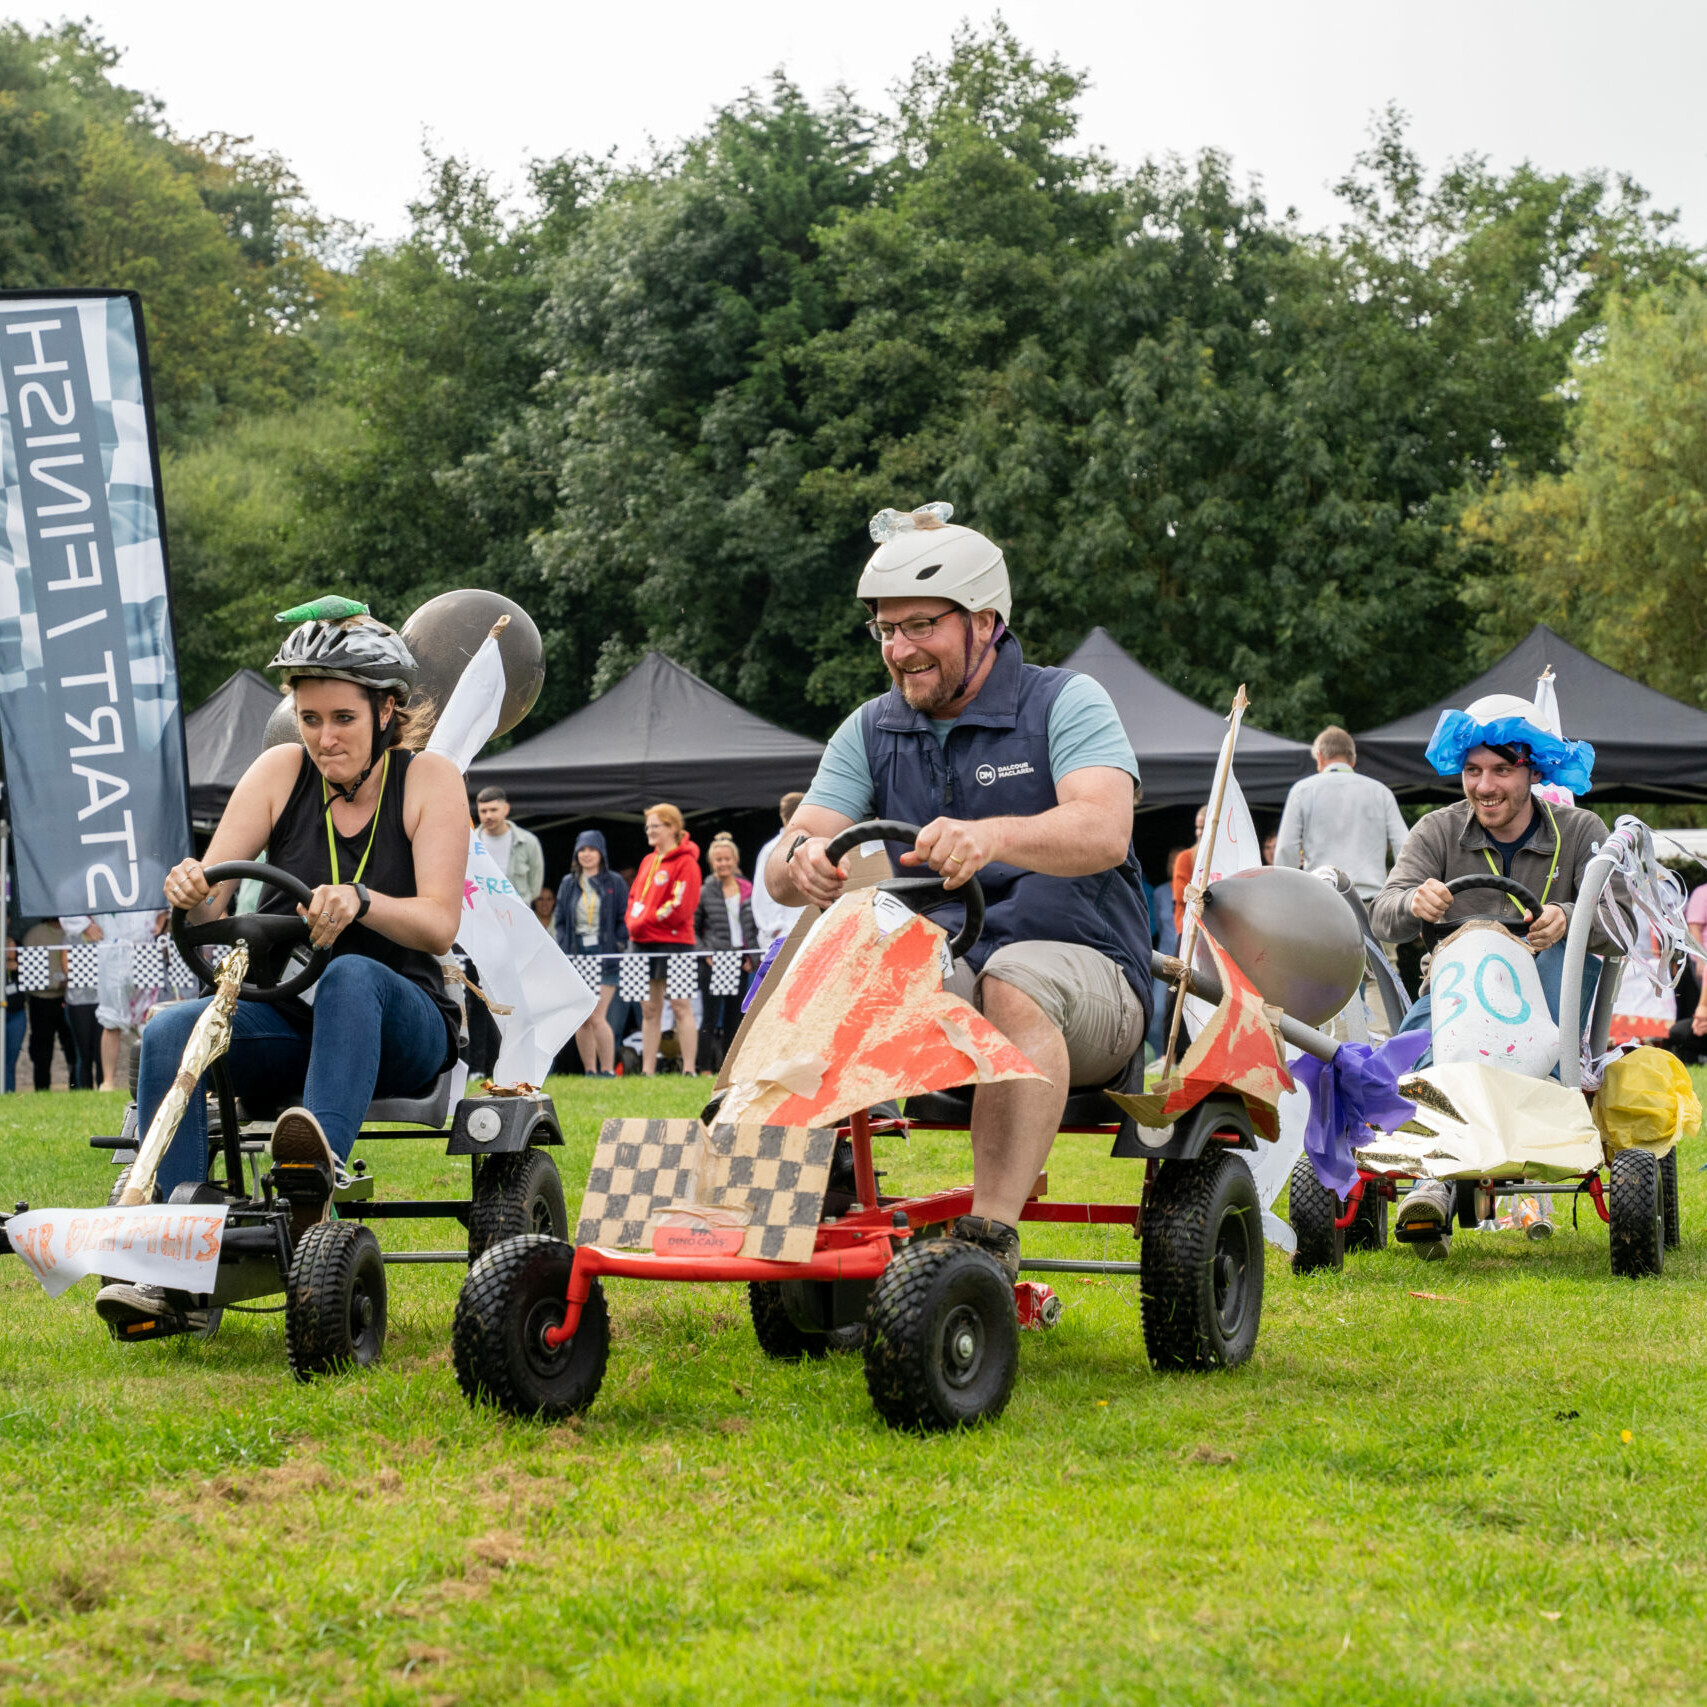 funny race on colourful carts during outdoor team building event